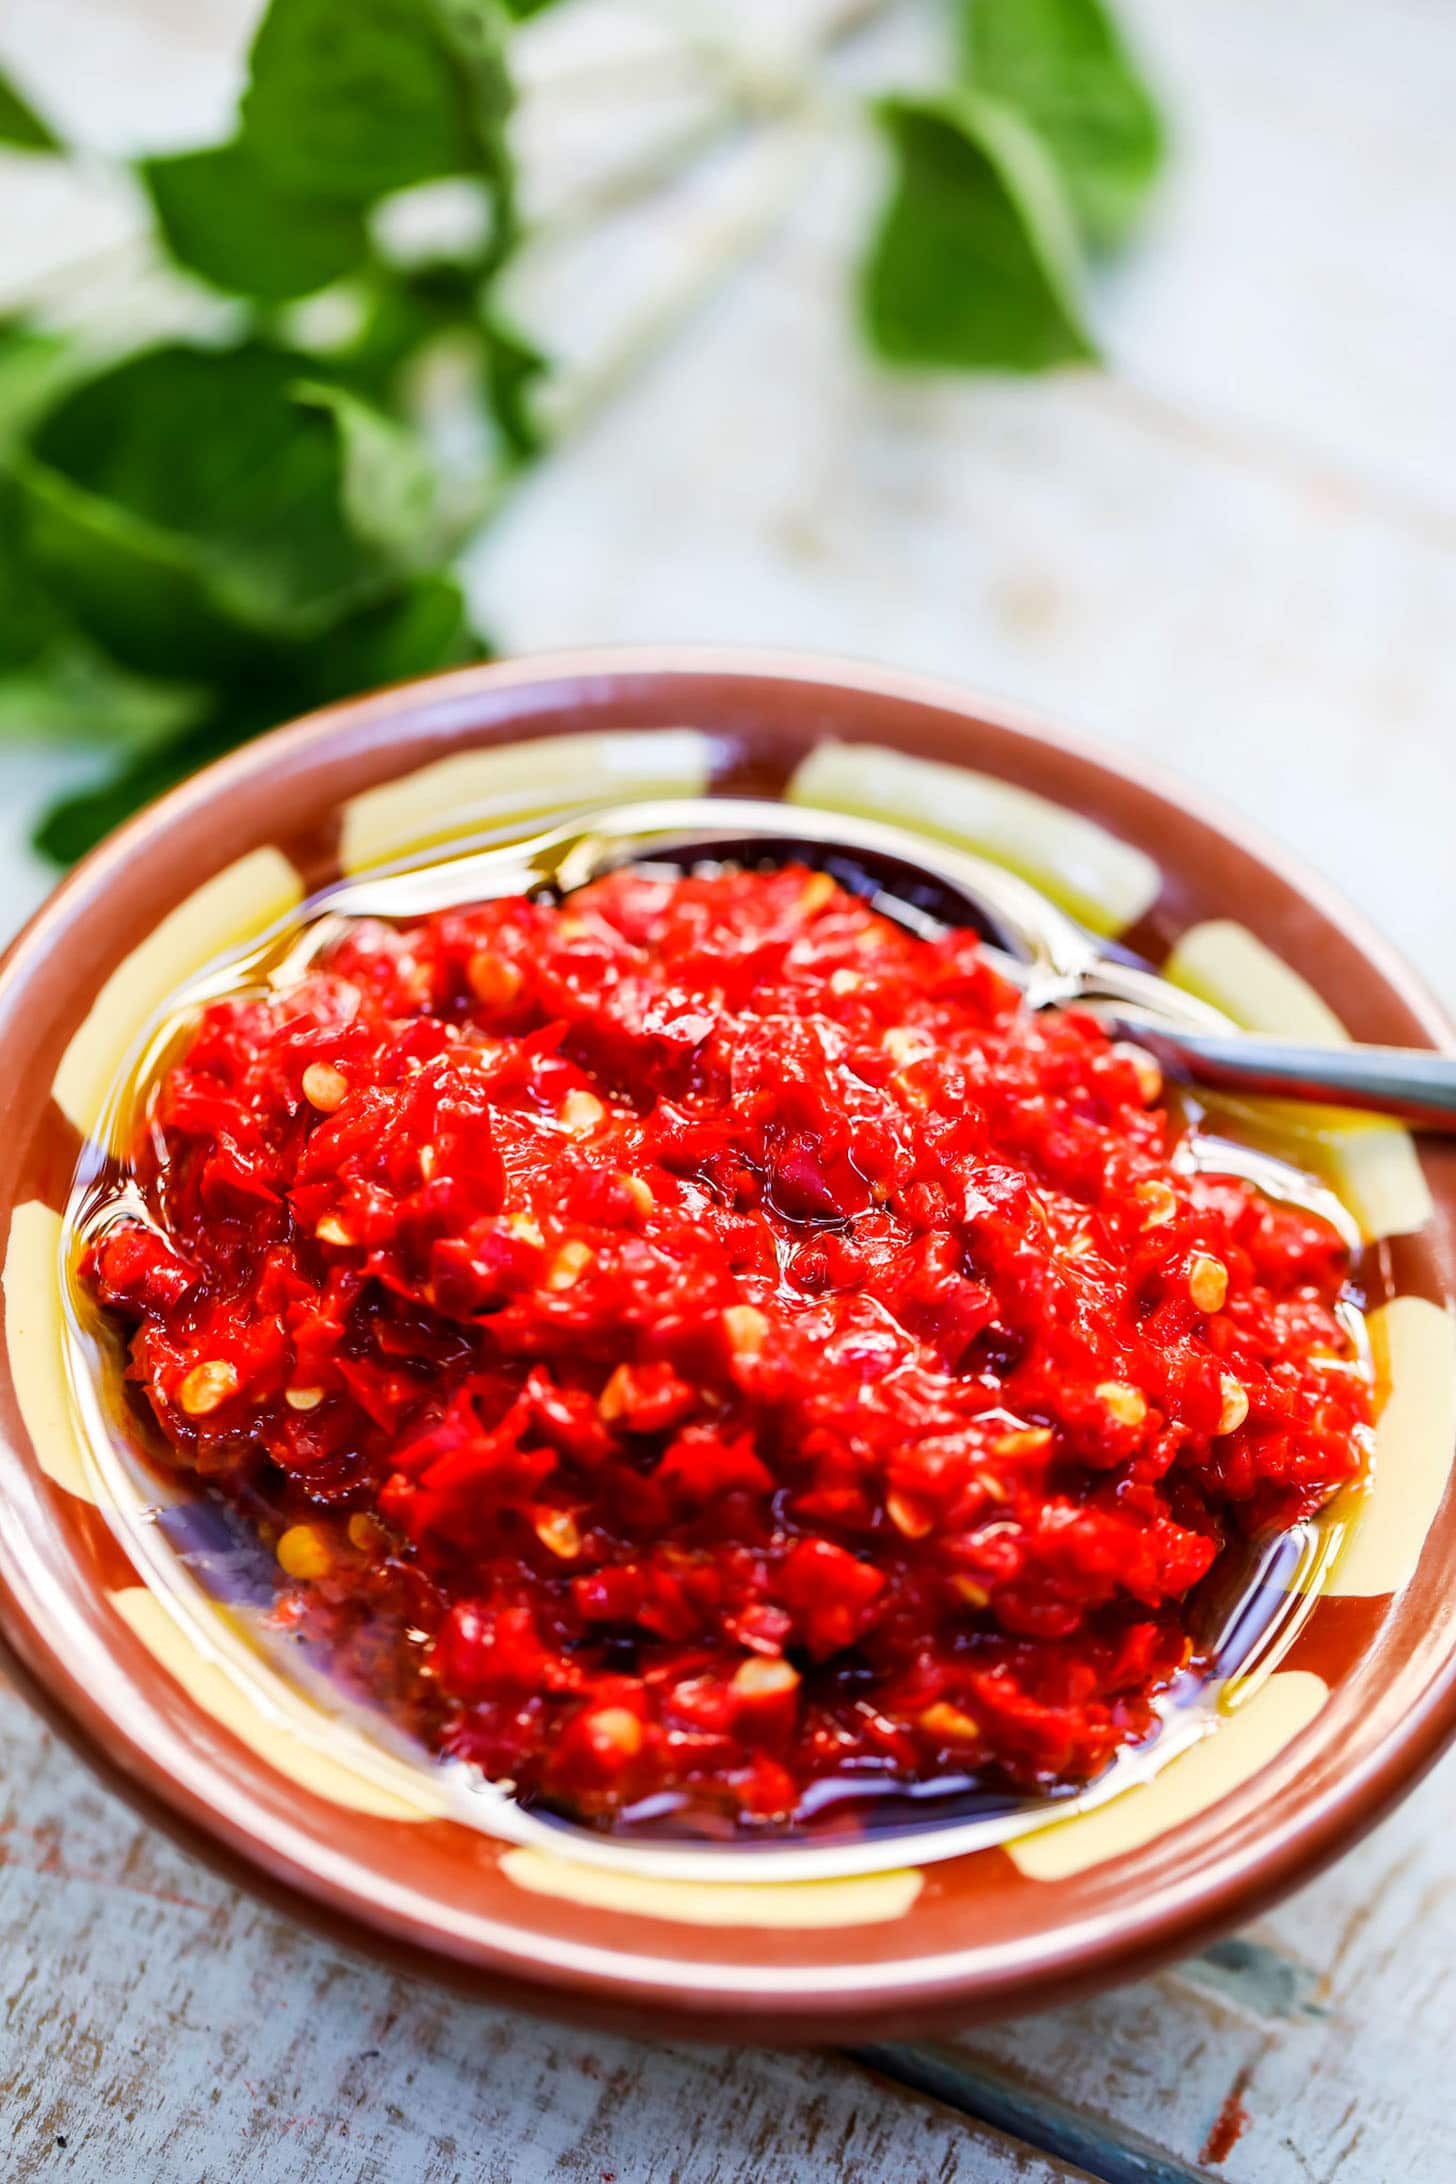 Harissa Recipe (North African peppers and spice paste)